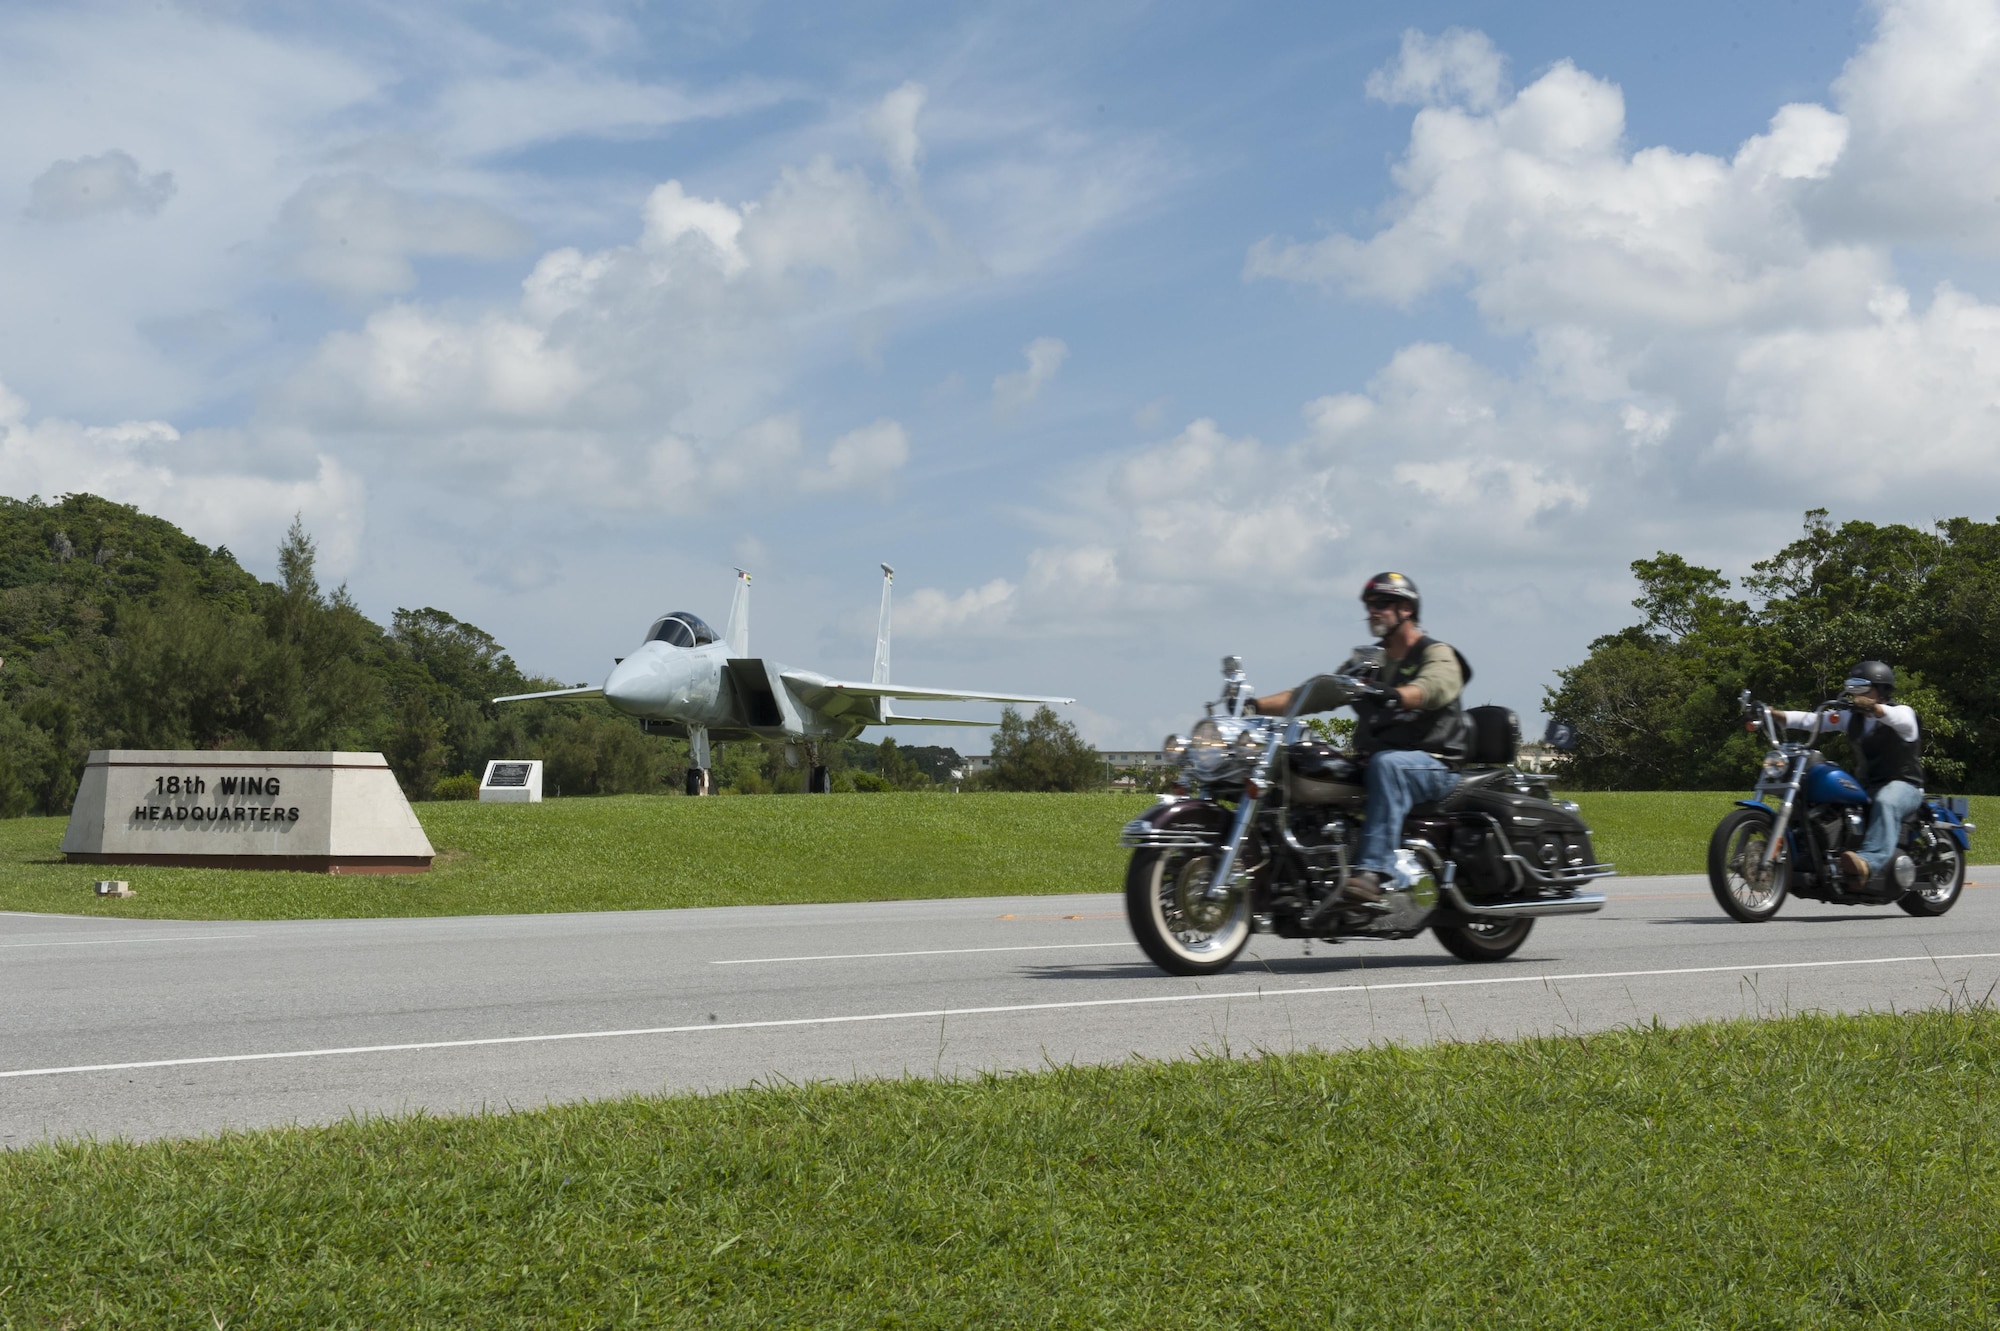 Riders from Kadena’s 2015 Prisoner of War/Missing in Action memorial ride drive past Air Power Park as they exit Kadena Air Base, Japan, on their journey to Cape Zampa, Sept. 18, 2015. Riders came together in support of the memorial ride from not just Kadena Air Base, but surrounding military installations as well. (U.S. Air Force photo by Airman 1st Class Zackary A. Henry/Released)
